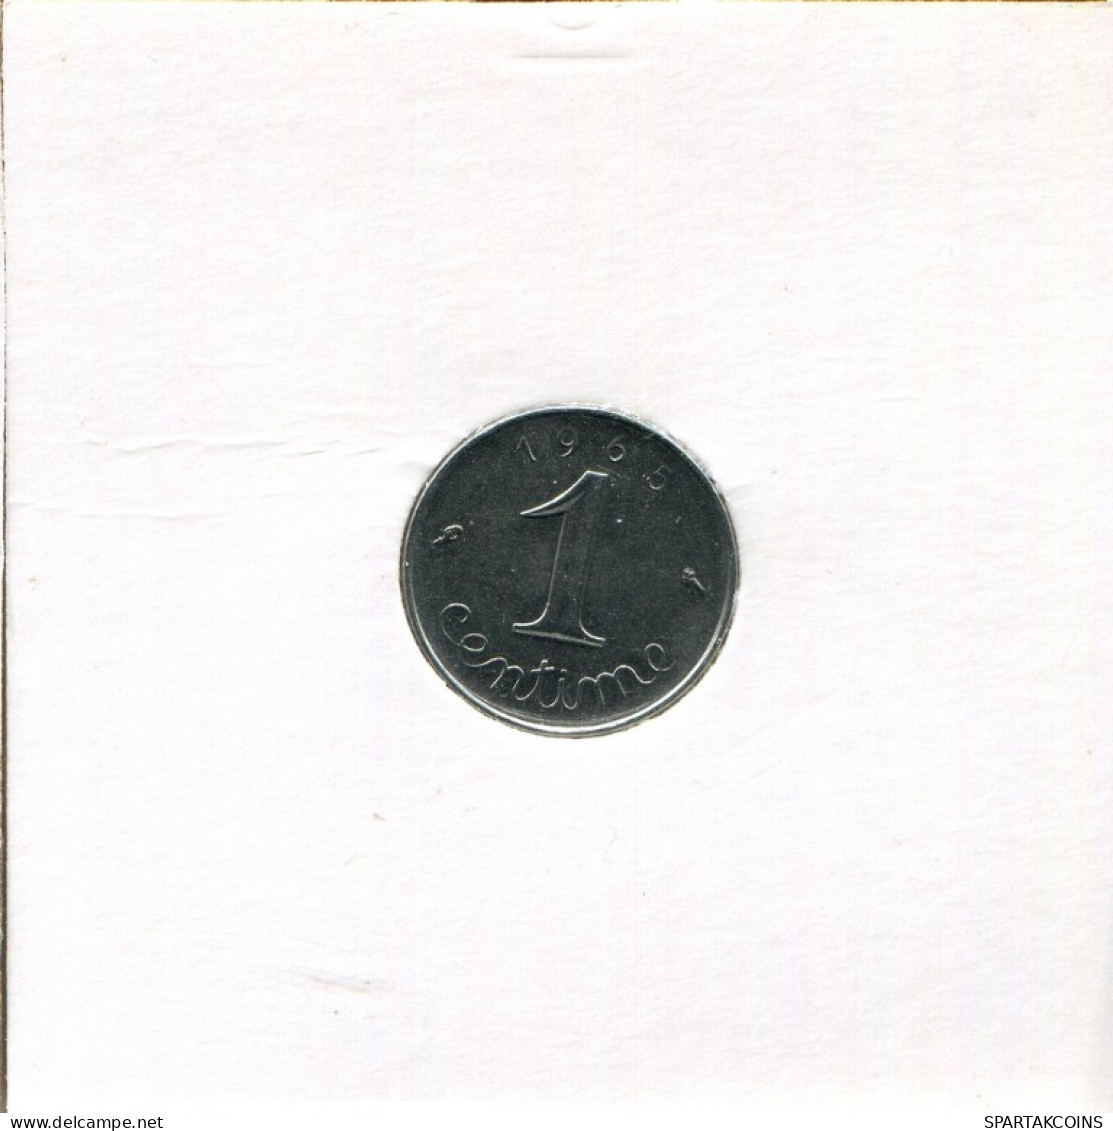 1 CENTIME 1965 FRANCE Coin French Coin #AK521.U.A - 1 Centime